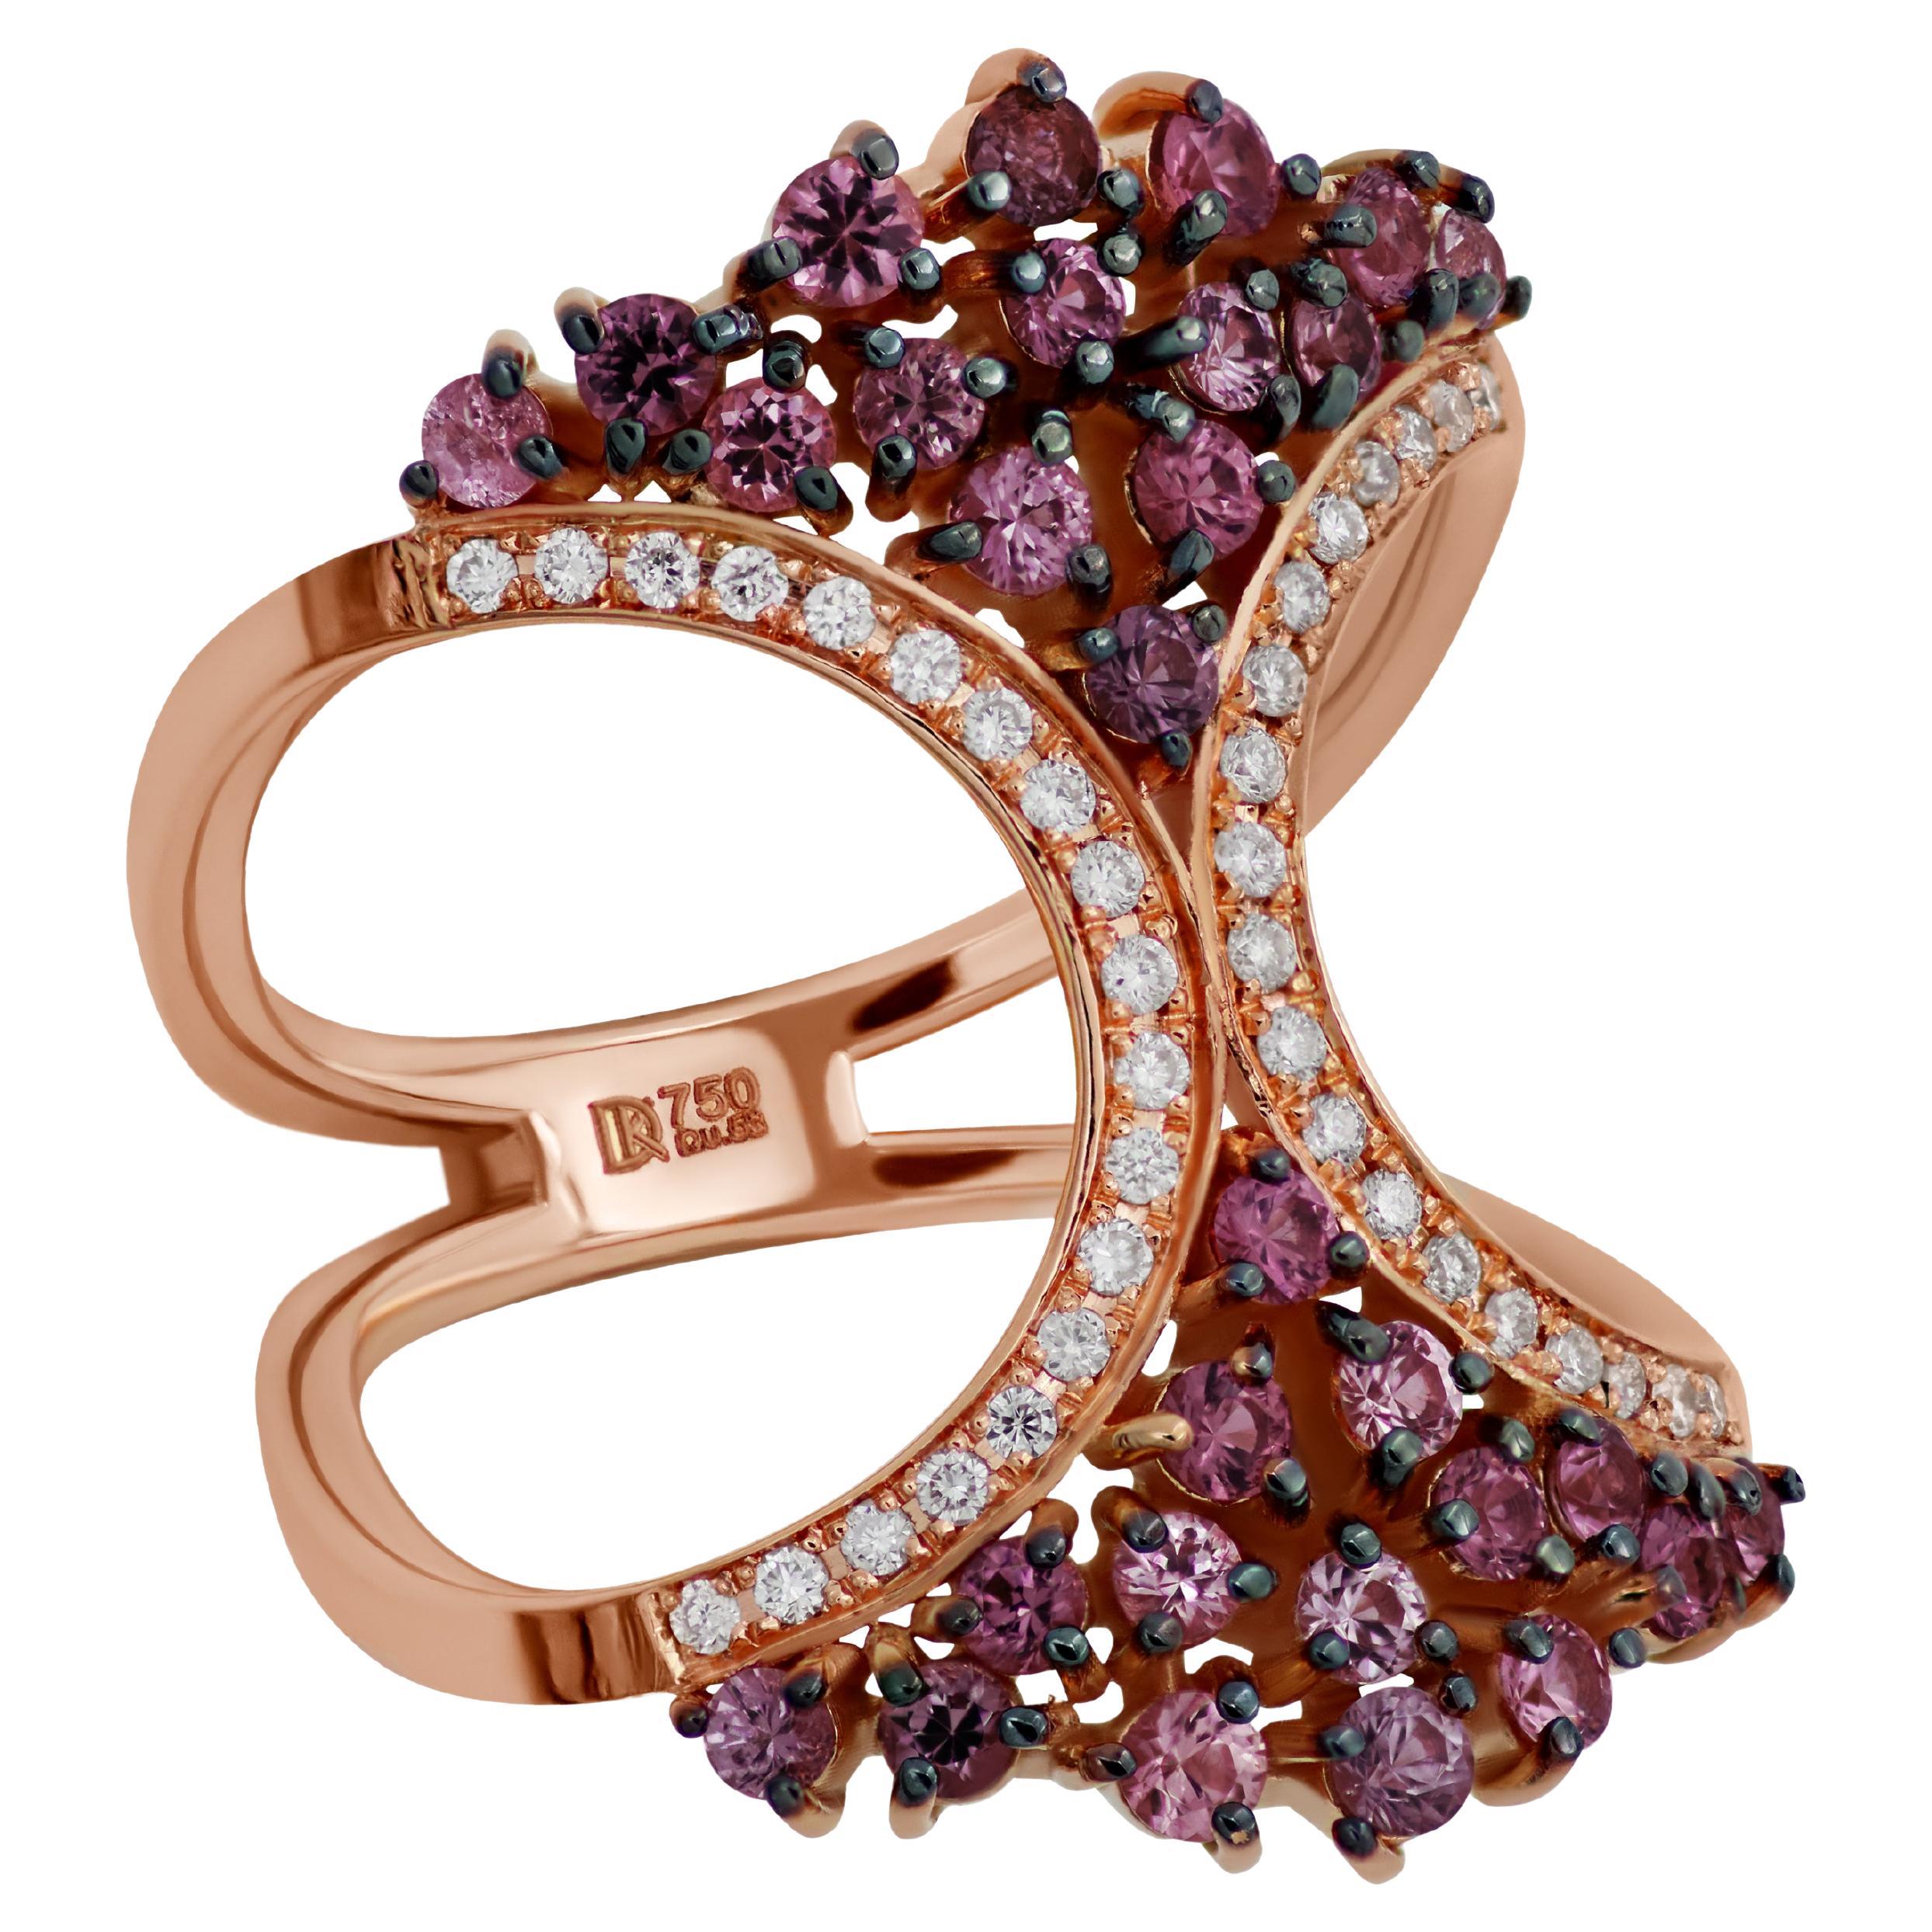 18k Rose Gold Ring with Spinel and Diamonds